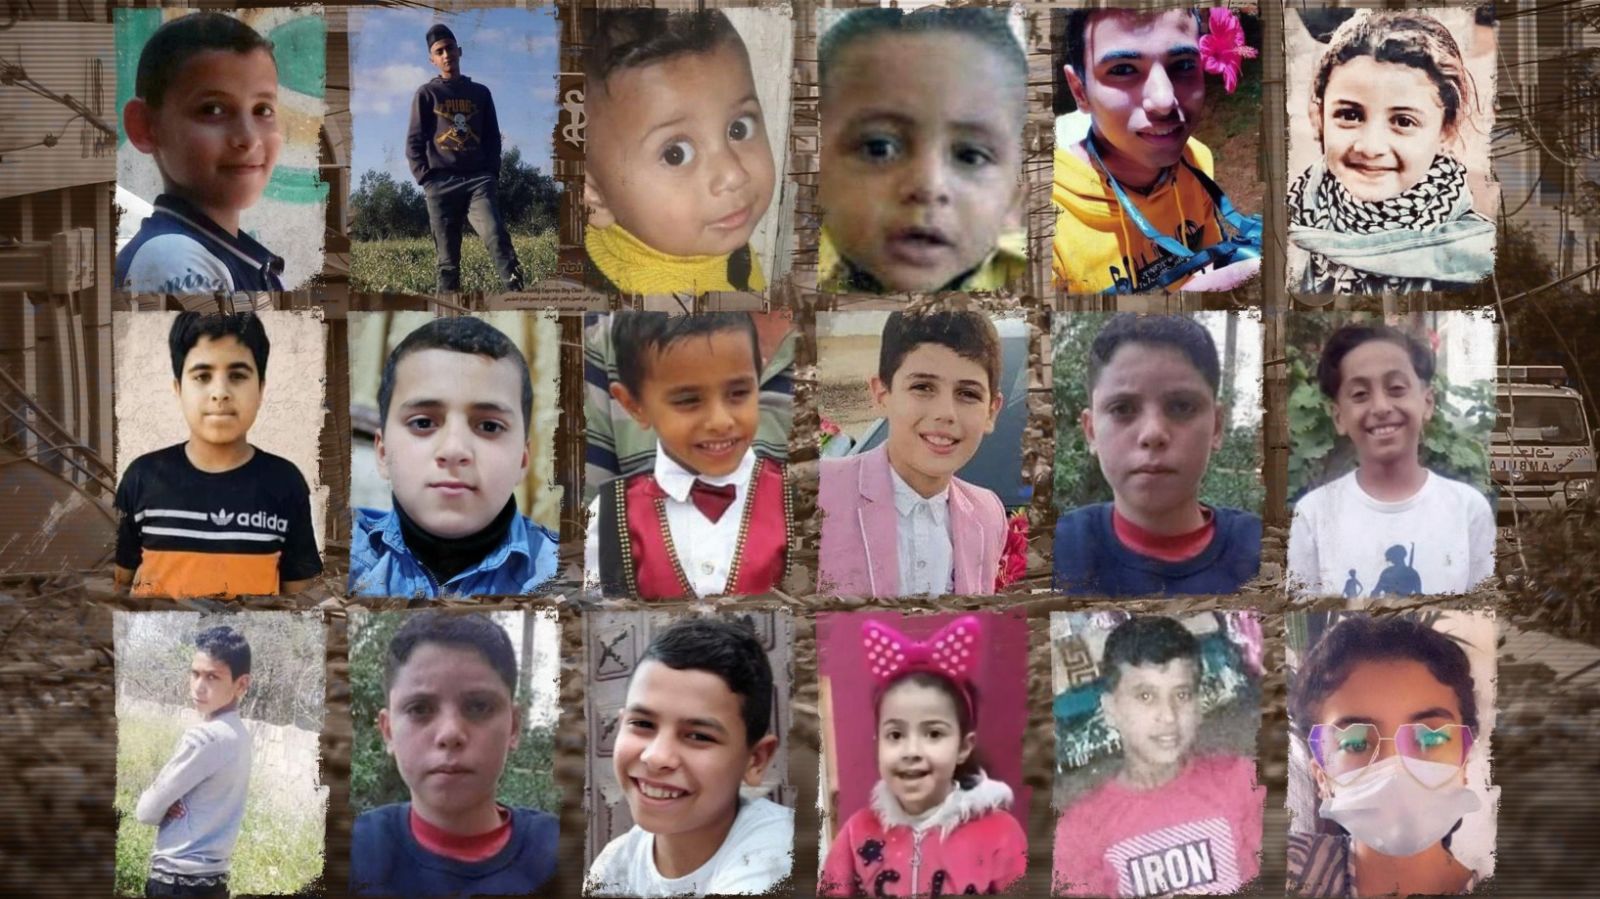 More than 70 children have been killed in the Israel-Palestine conflict.  These are their names and faces | ITV News